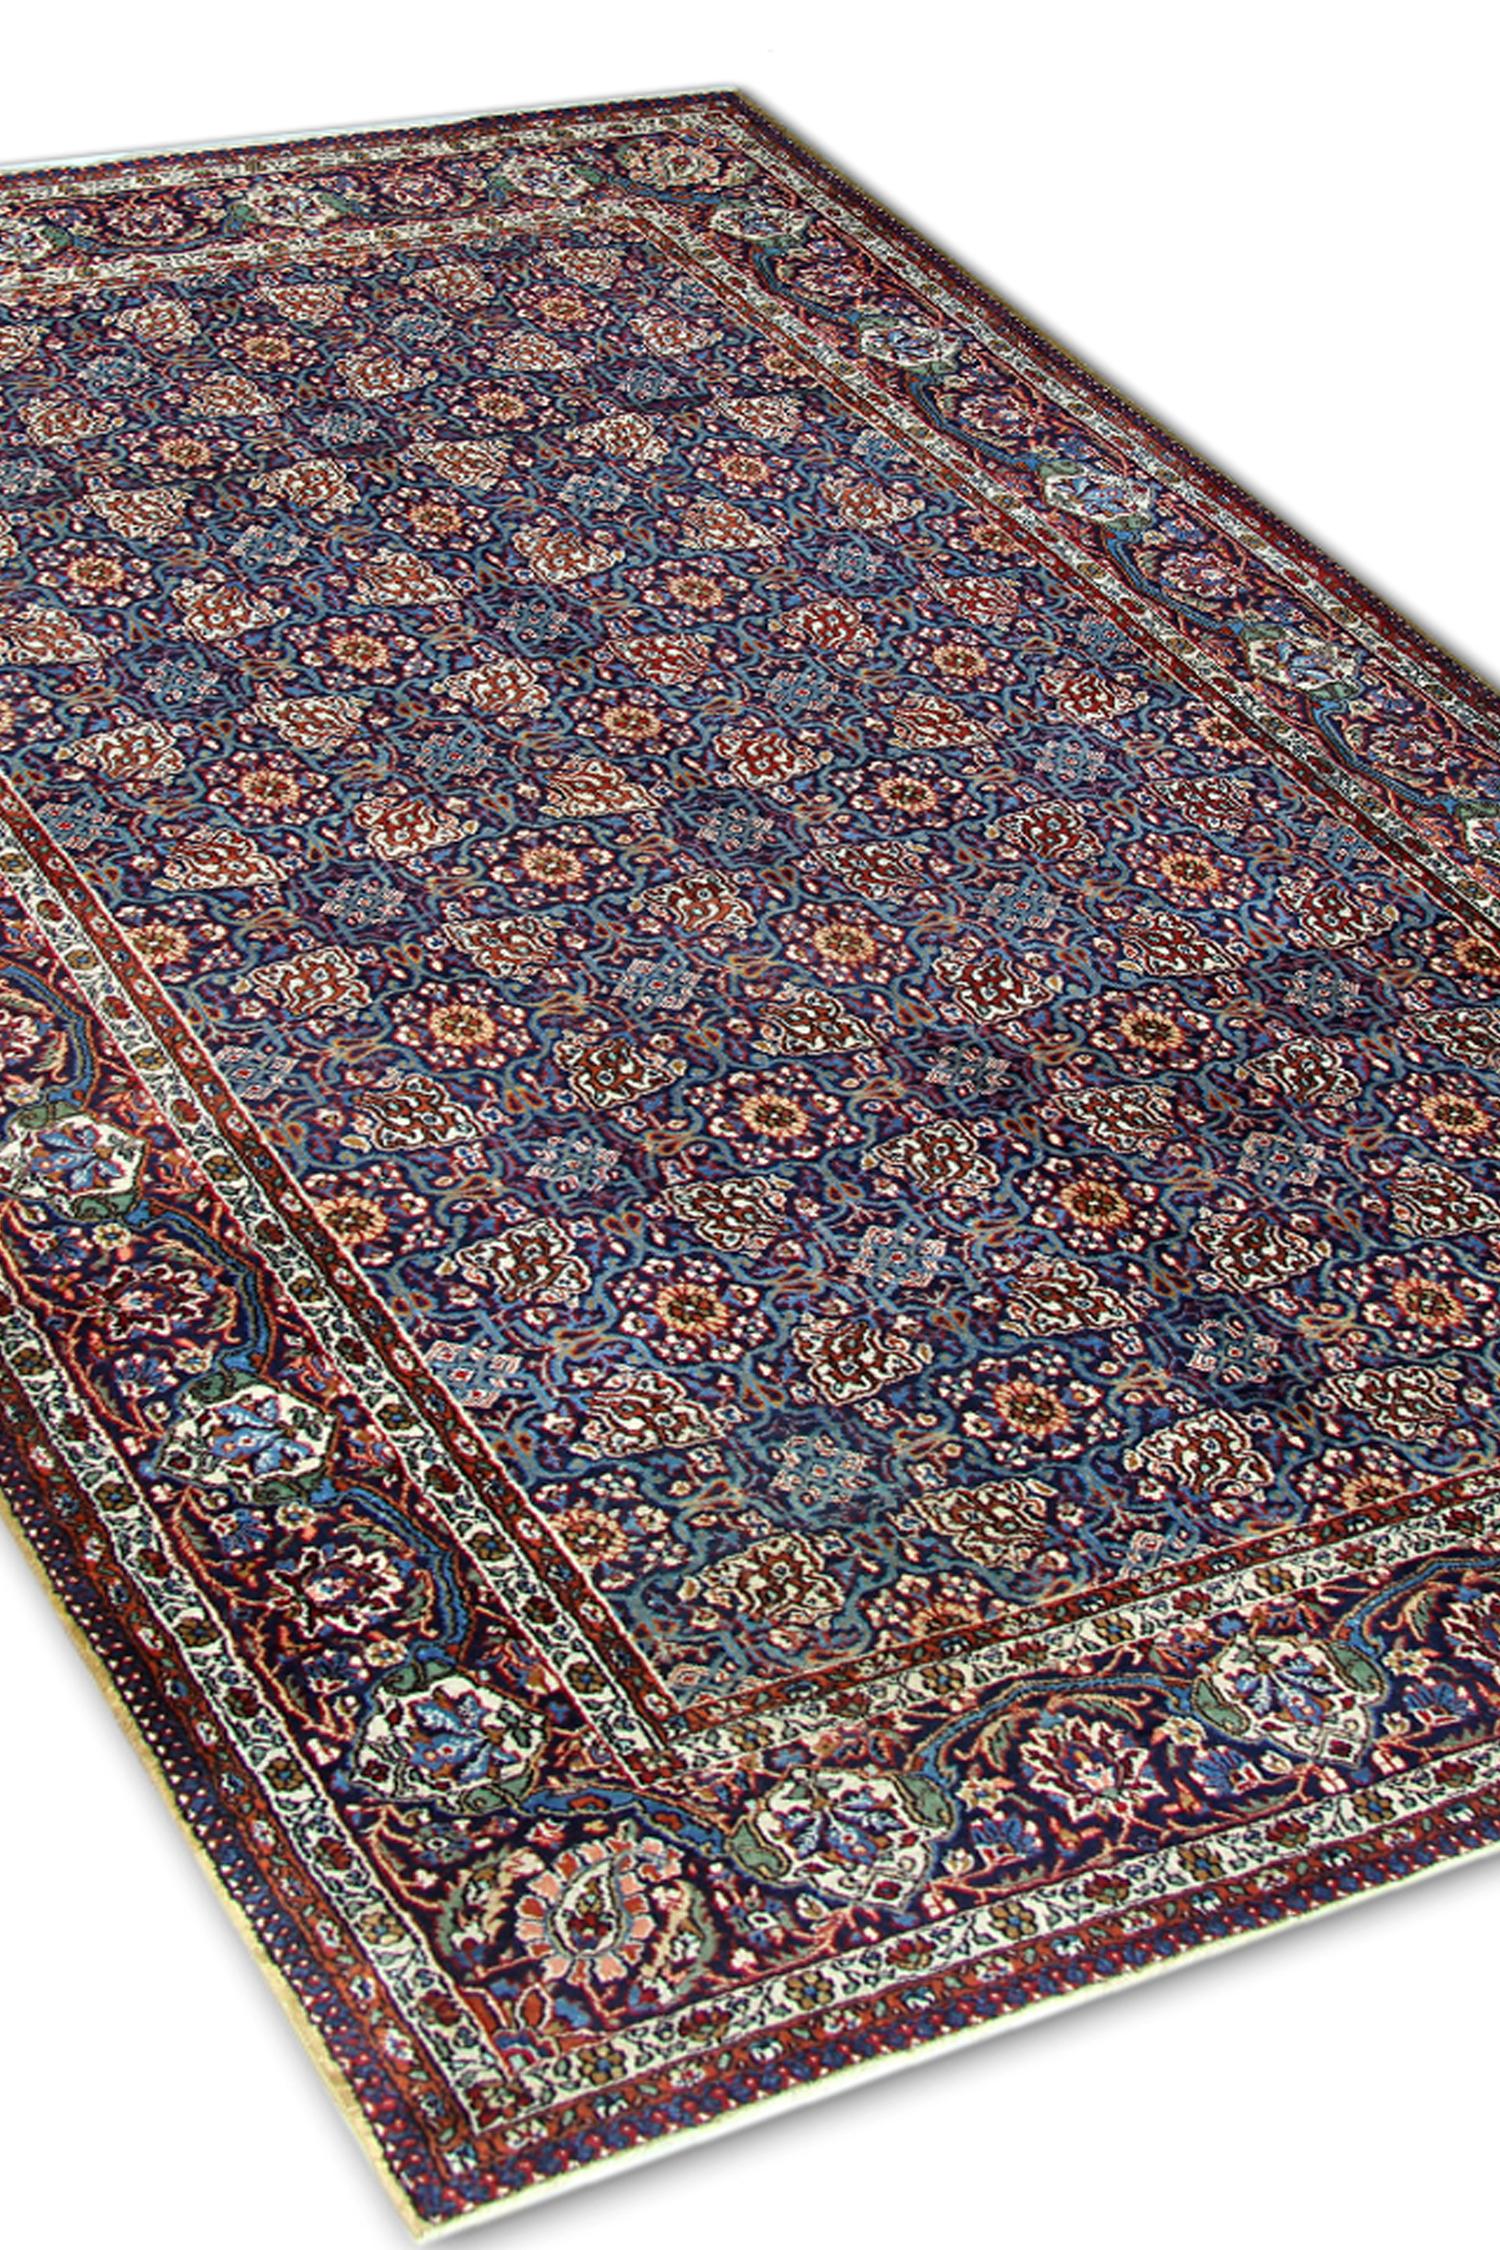 This antique Rug was hand-knotted circa 1900. They featured a navy blue field filled with a profusion of floral and geometrical elements intricately woven with a high level of detail. The repeat pattern central design is bordered by an equally